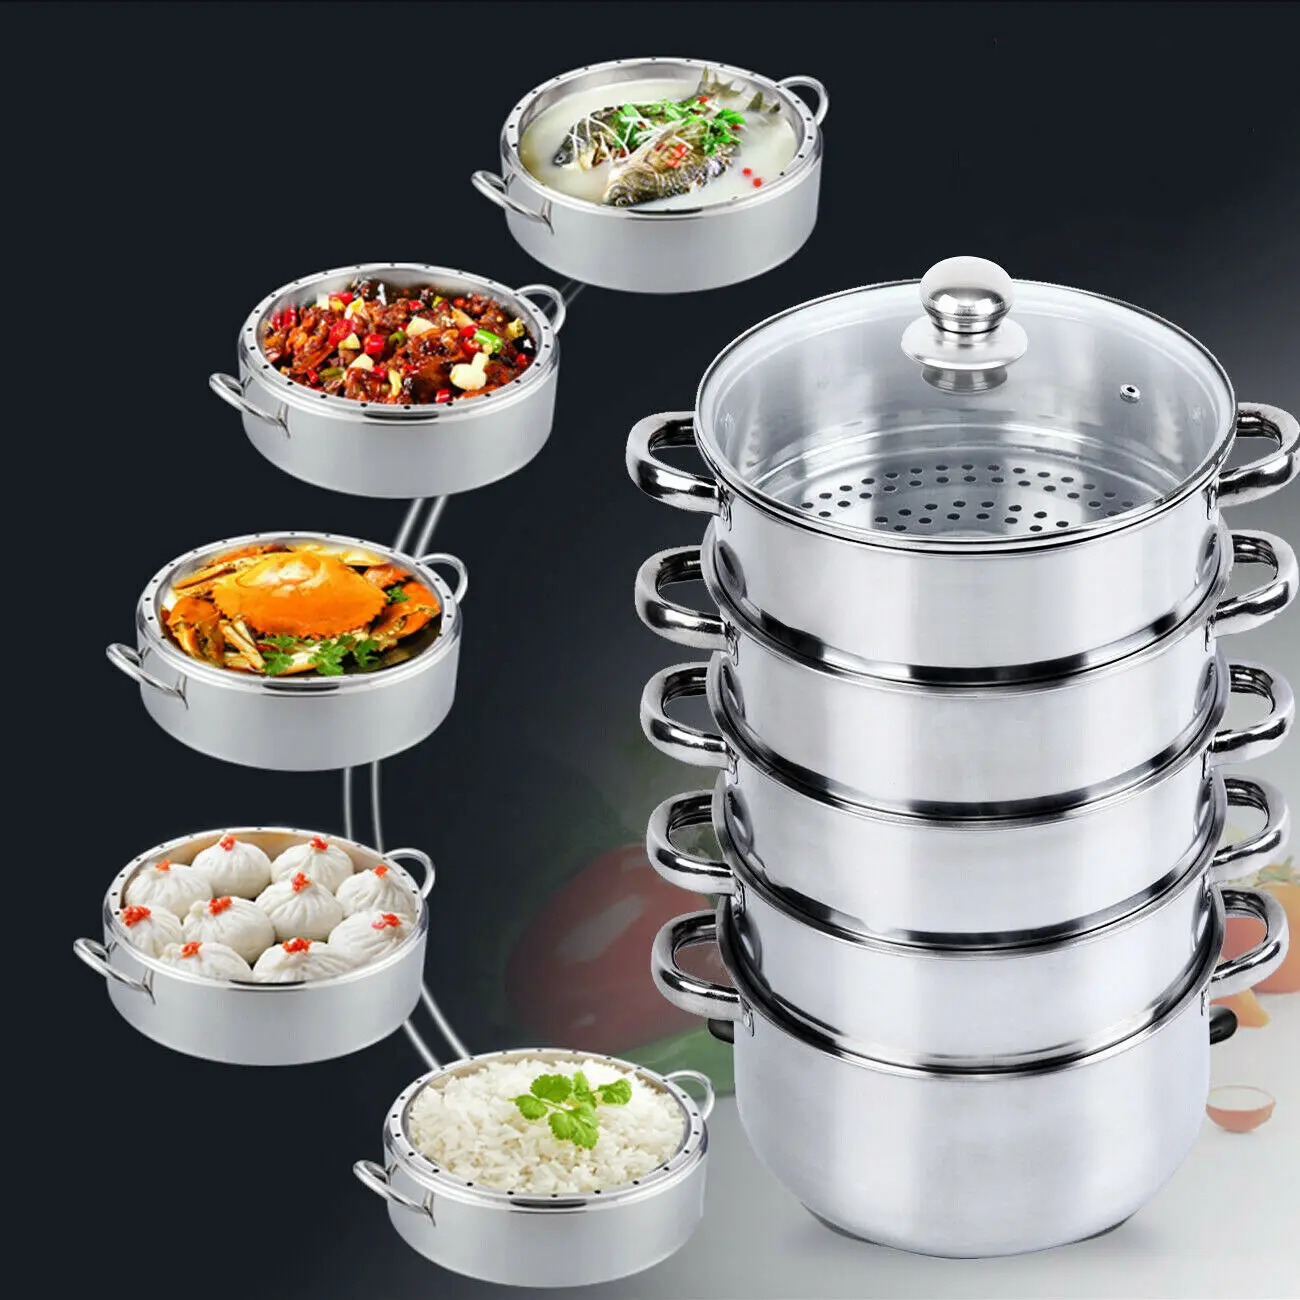 

Yonntech 5 Tier Food Steamer Pot Stainless Steel 30cm Soup Steam Pot Universal Cooking Pots for Induction Cooker Gas Stove steam